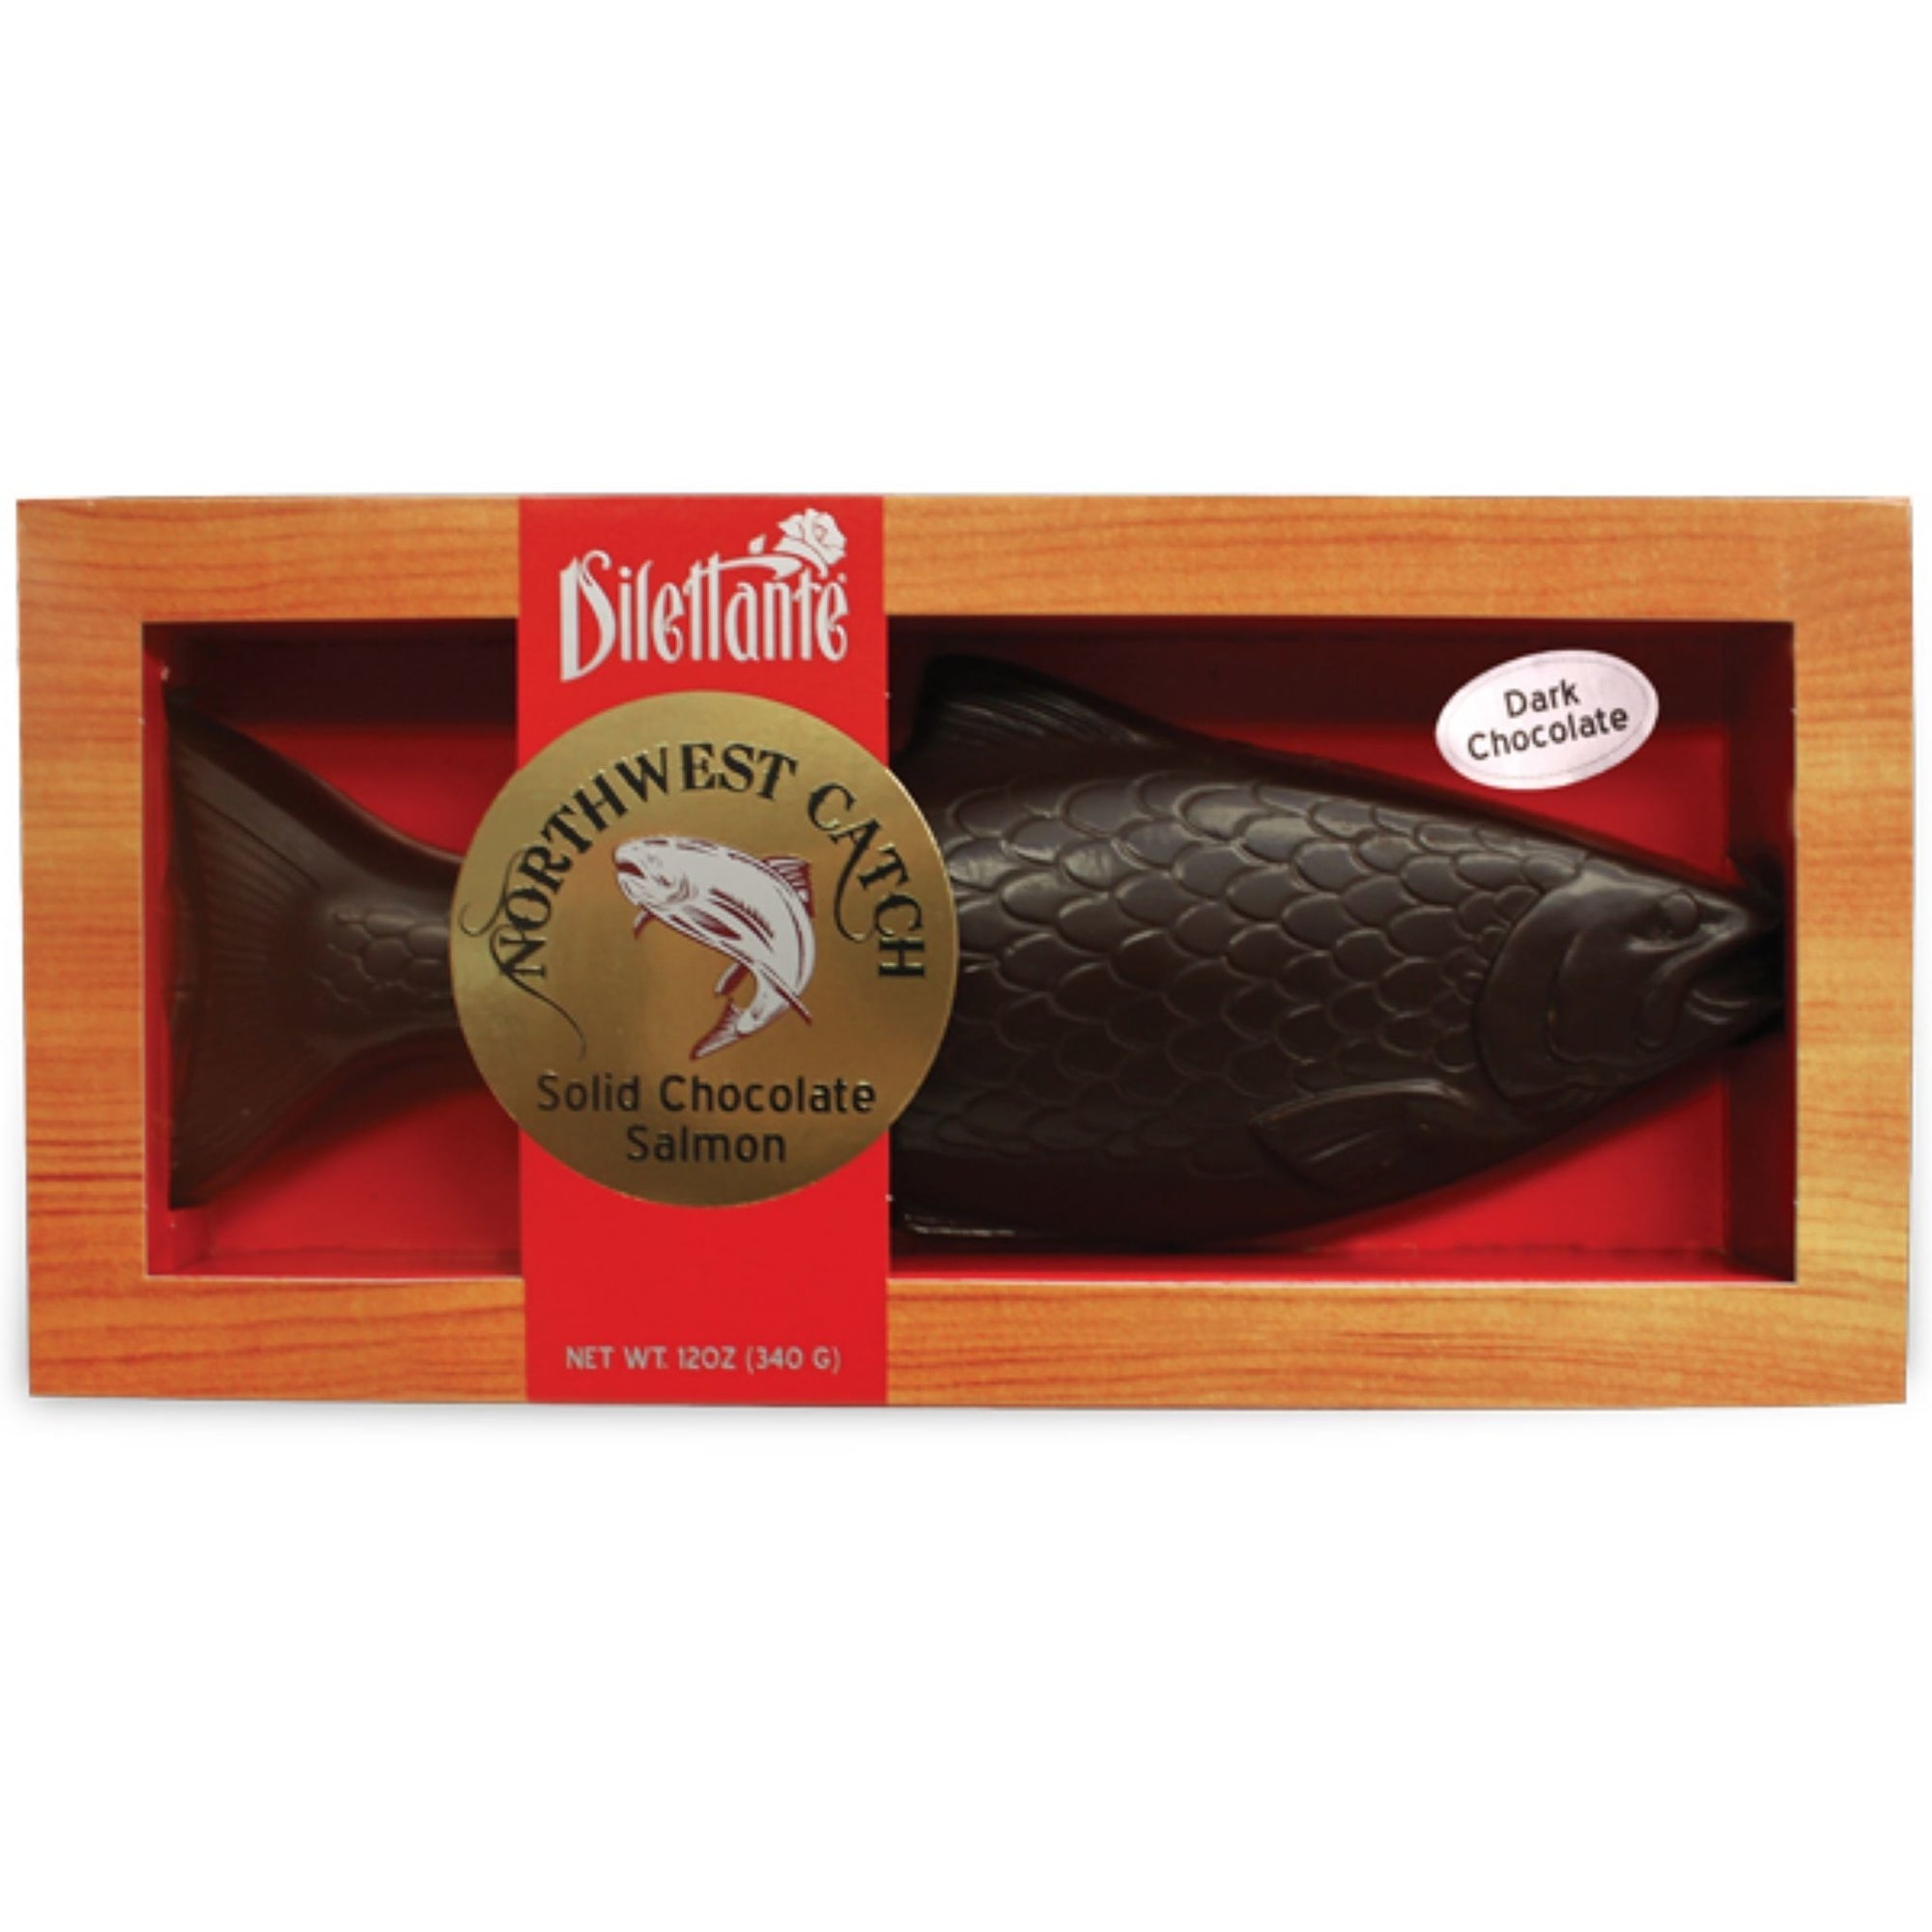 Dilettante Chocolates Dark Chocolate Almond Packaged in a Faux Trophy Case